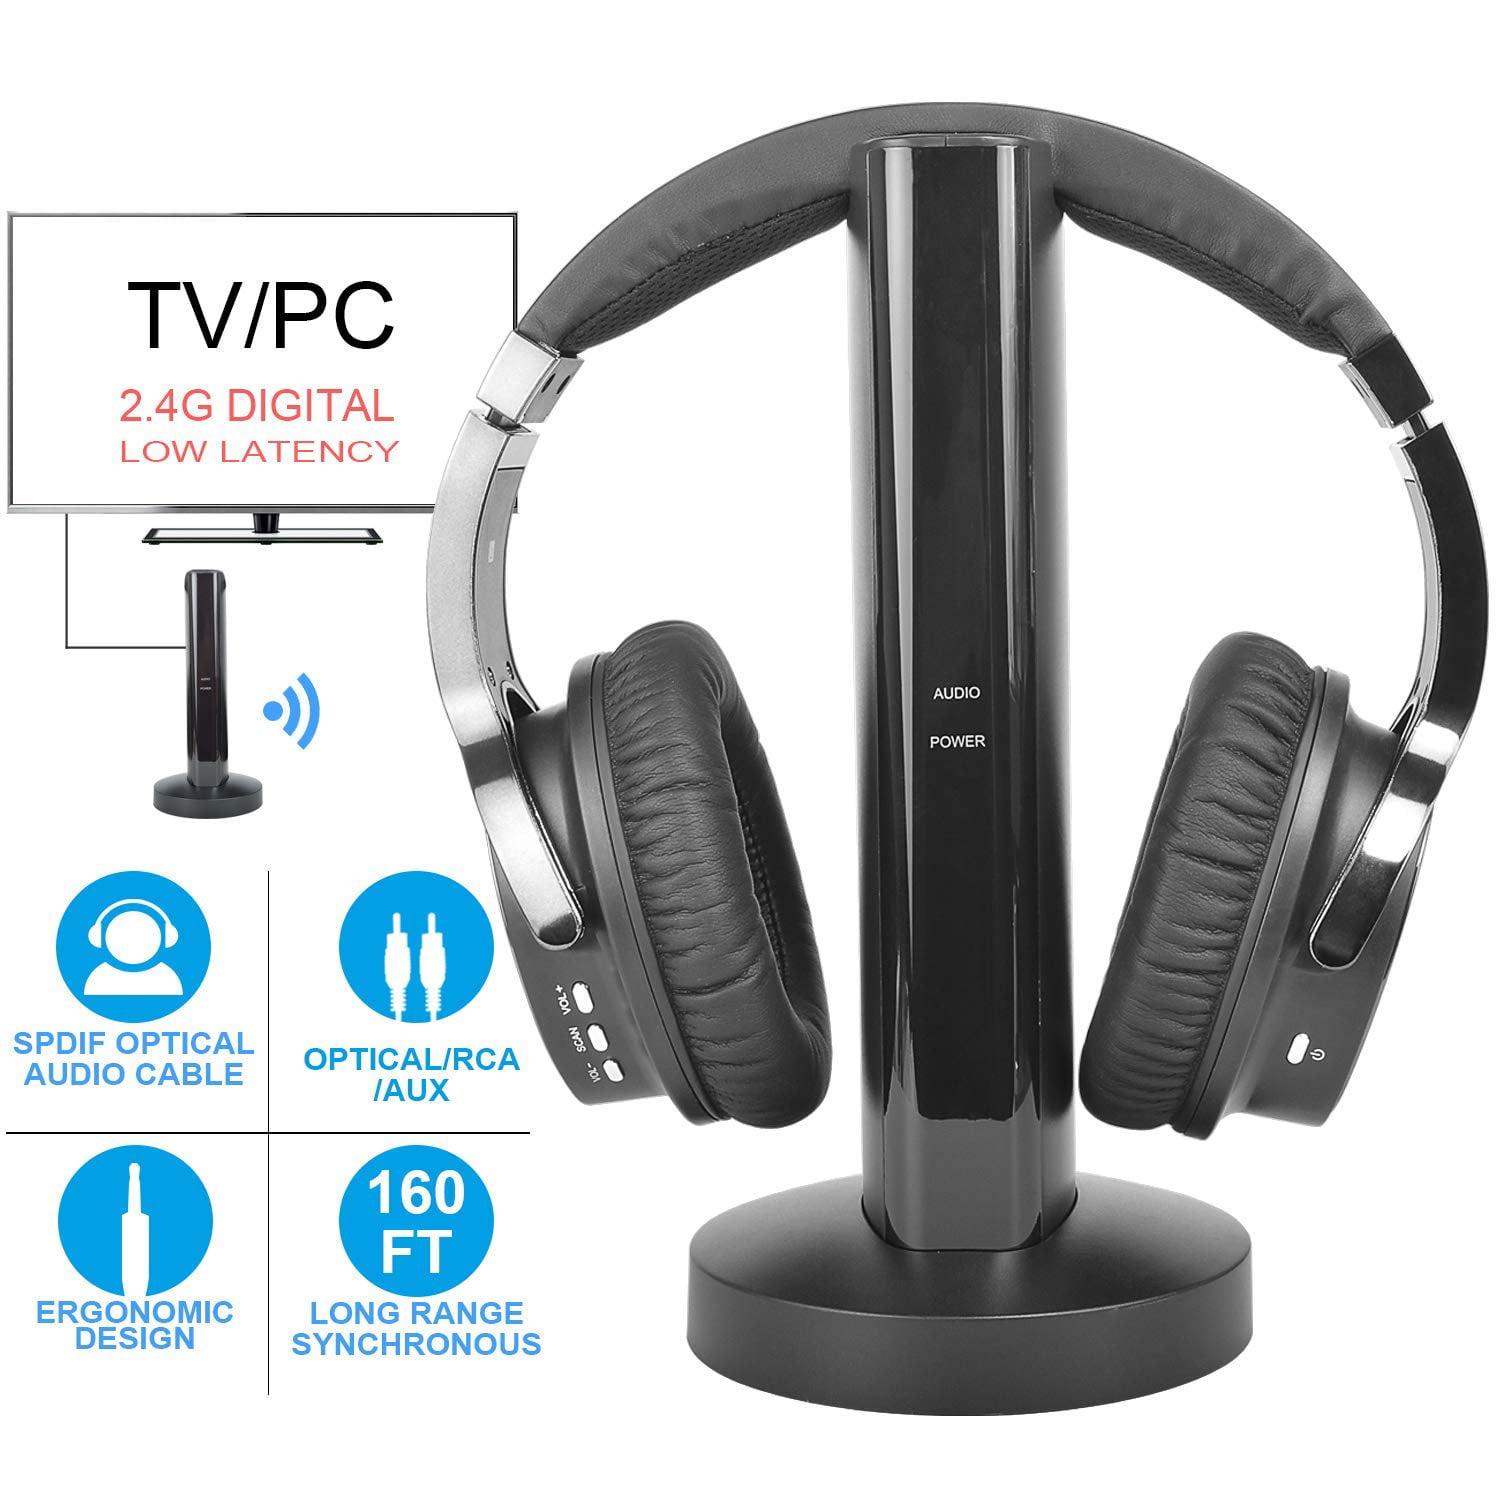 Wireless TV Headphone 2.4G Digital RF Transmitter Charging Dock, Hi-Fi Over-Ear Cordless Headset with RCA and 3.5MM Connection, for Watching Home TV Games Computer Radio